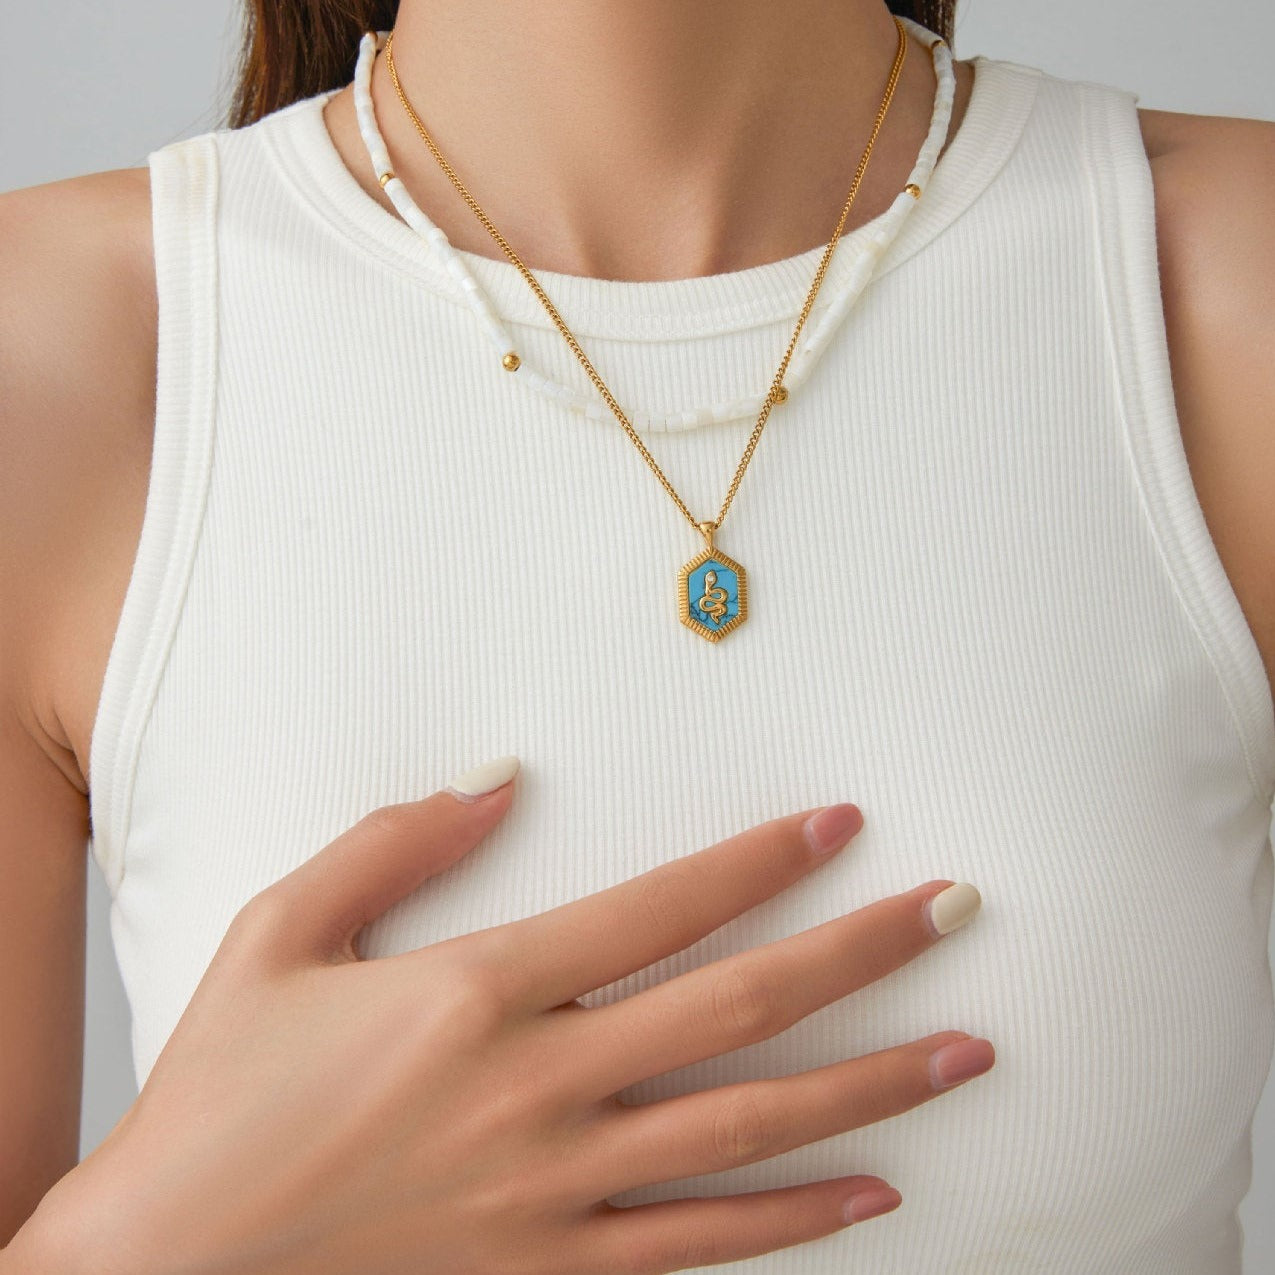 Minimalist Vintage-inspired Natural Stone Beaded Women's Necklace - Unique Design with a Touch of Elegance | UponBasics  UponBasics   